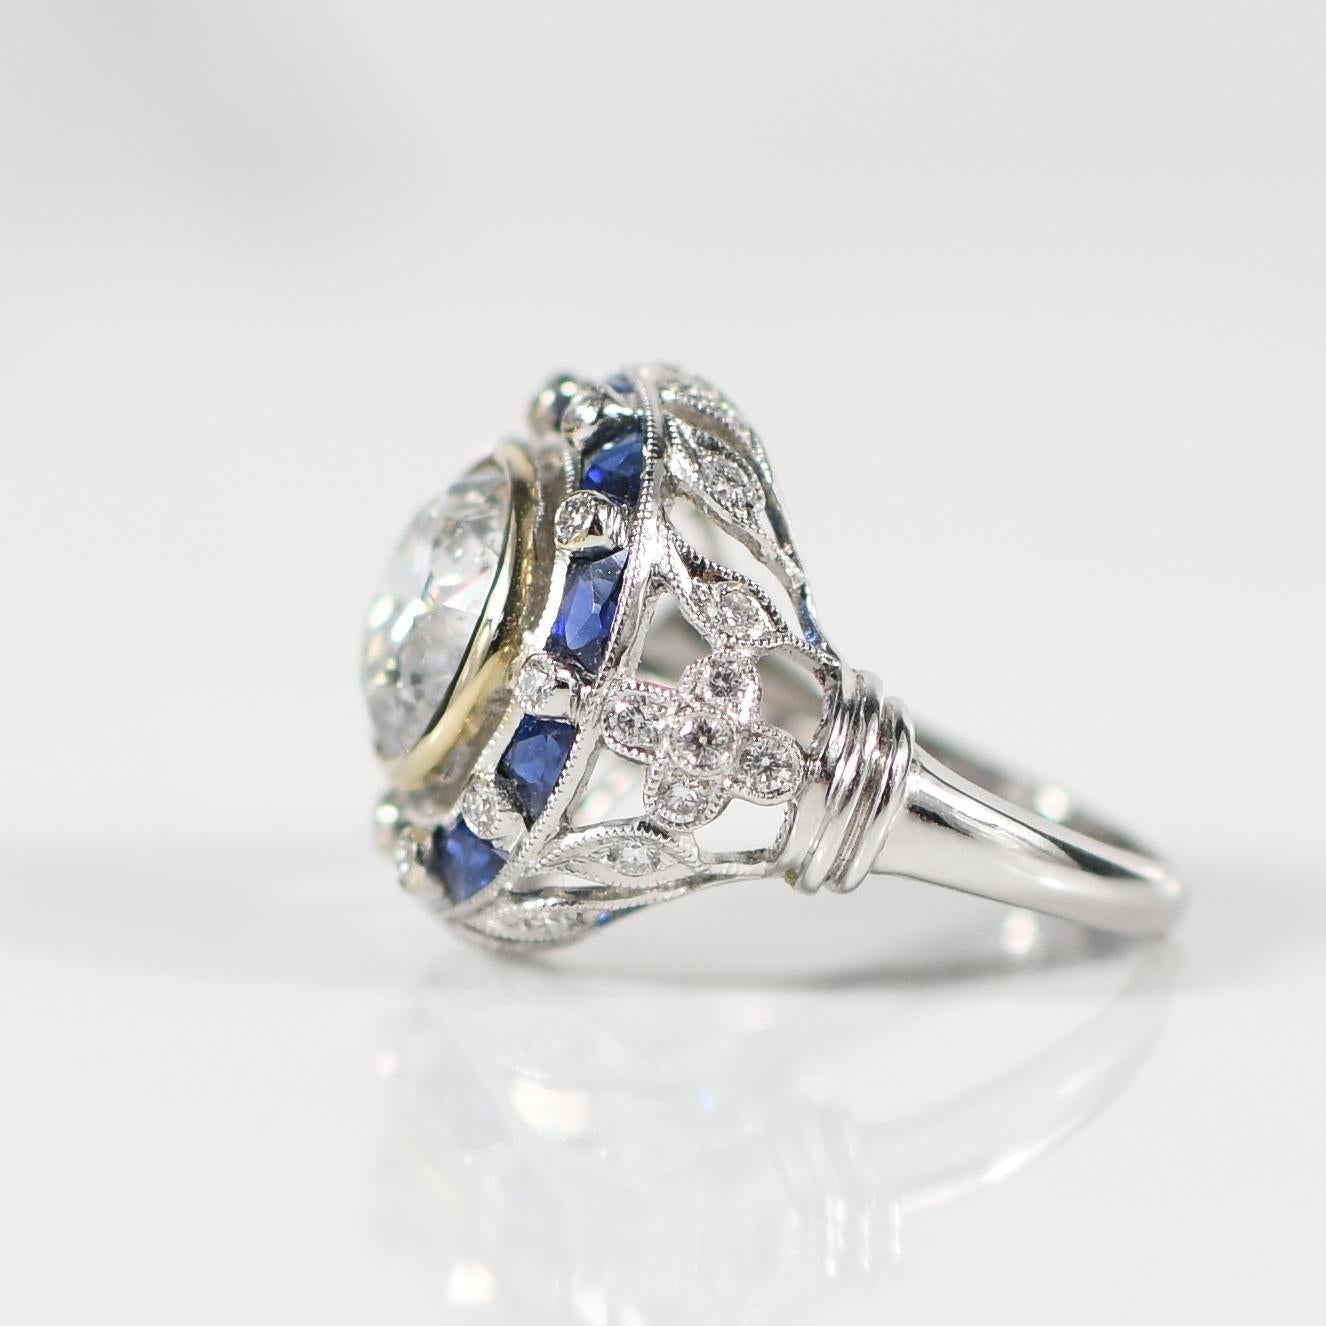 Step into the glamour of the Art Deco era with this captivating engagement ring, featuring a stunning 3.52 carat old European cut diamond as its centerpiece. Encircled by a halo of vibrant sapphires totaling approximately 1.19 carats and accentuated